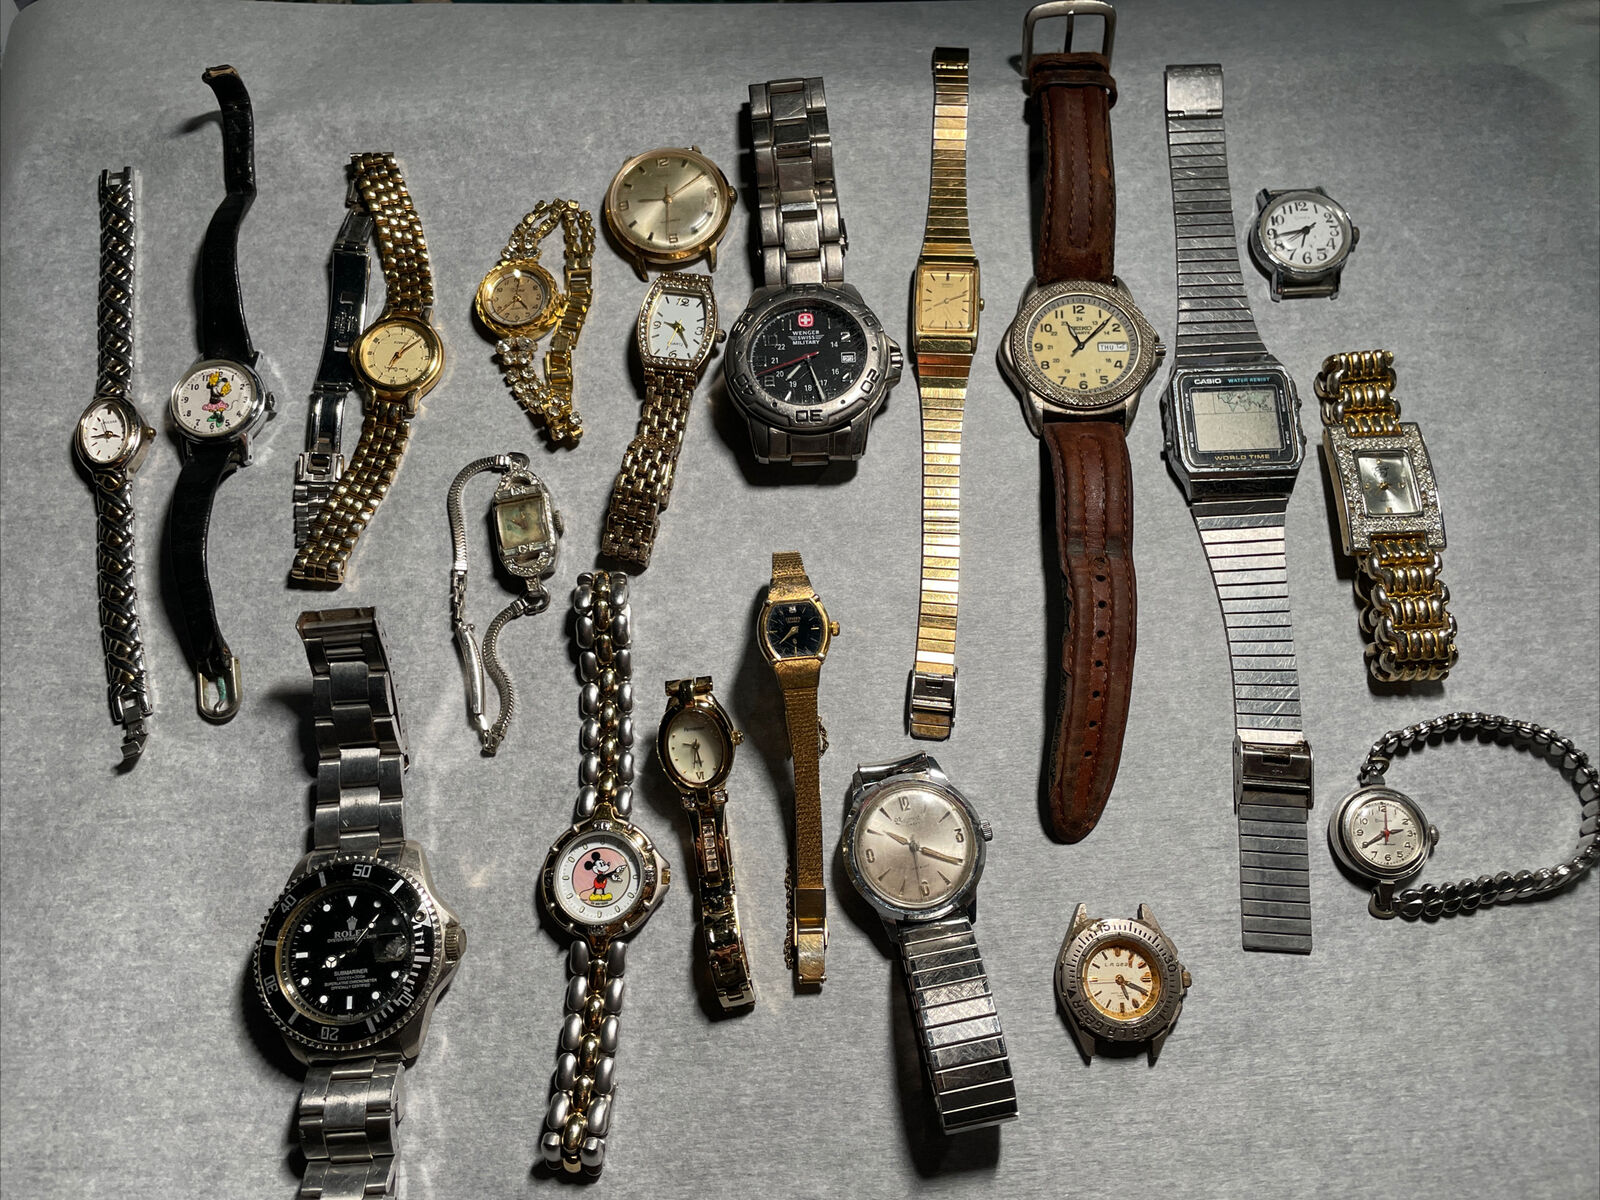 Watchmakers Lot Of 20 Mixed Brand Vintage Wristwatches Parts Or Repair